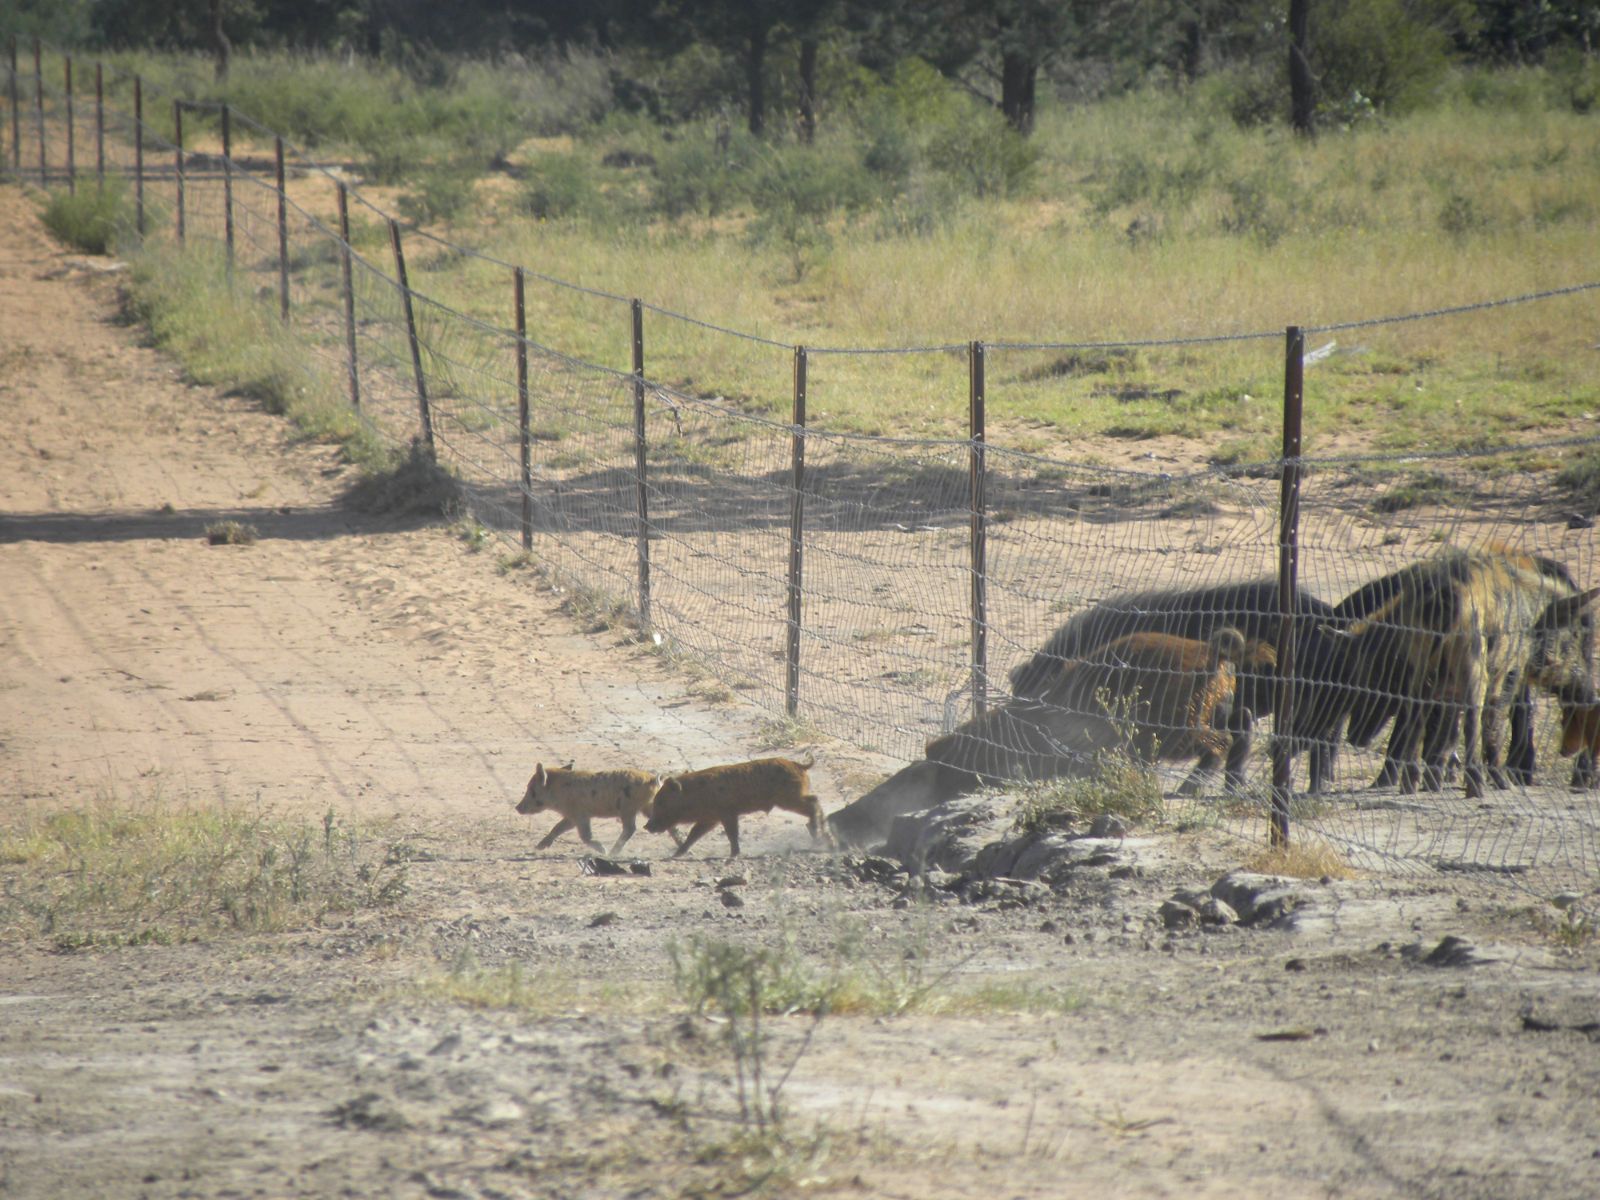 Feral pigs pushing under a wire fence.